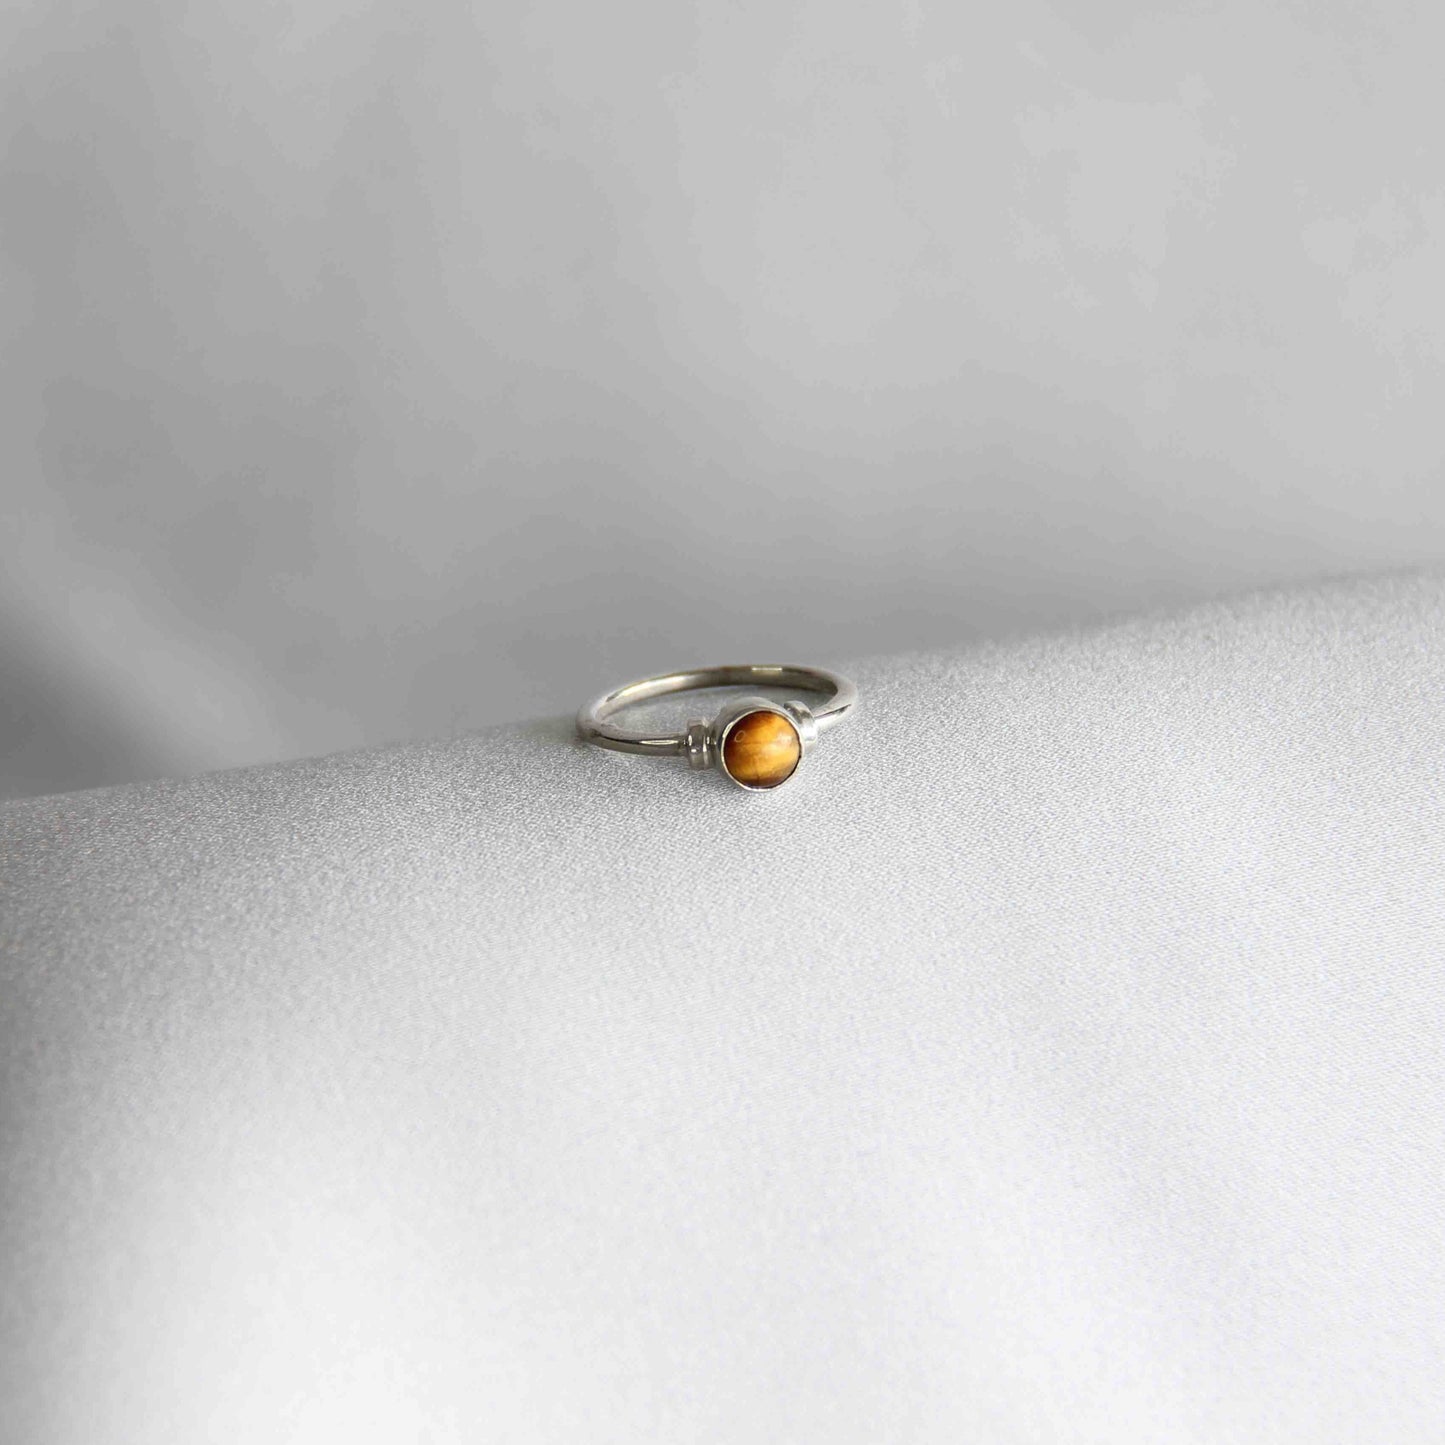 925 Sterling Silver Band Ring with Tiger's Eye Gemstone